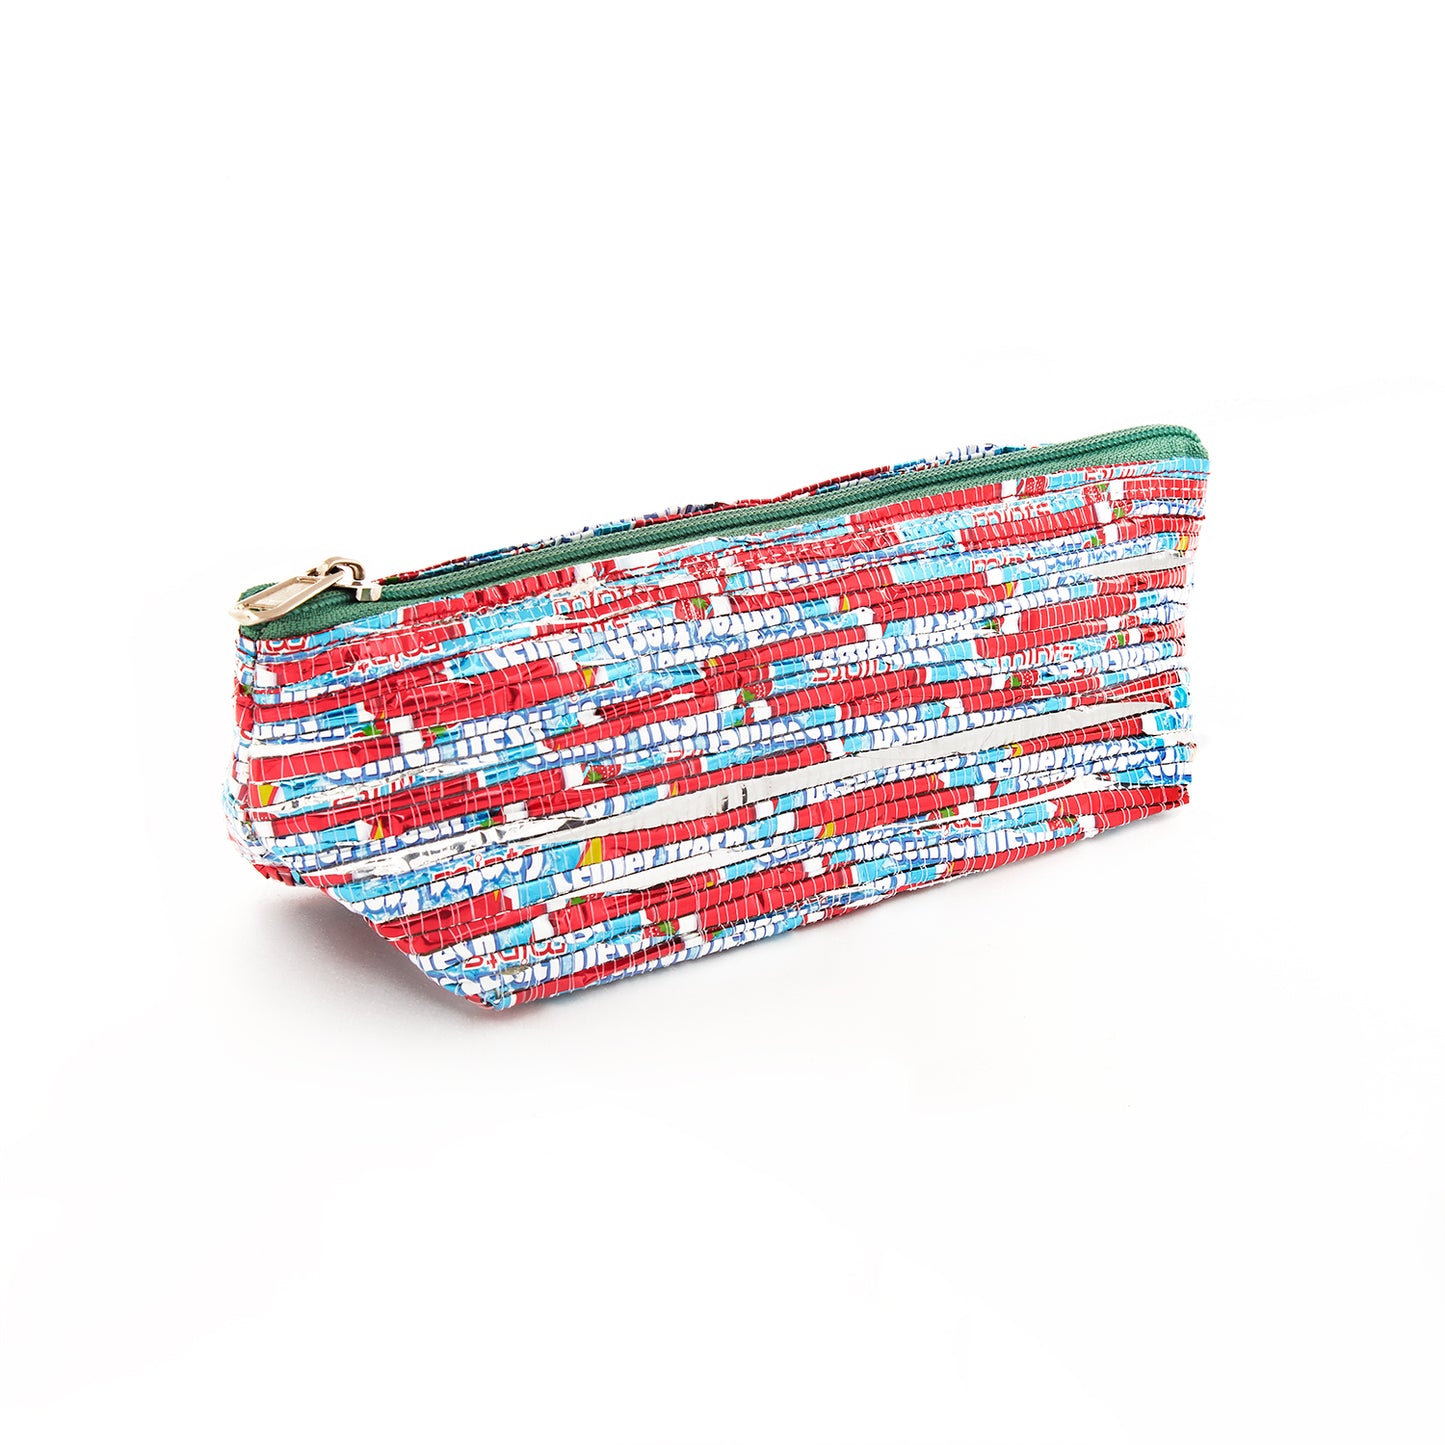 Red & Blue Recycled Plastic Pencil Pouch (MLP Plastic)